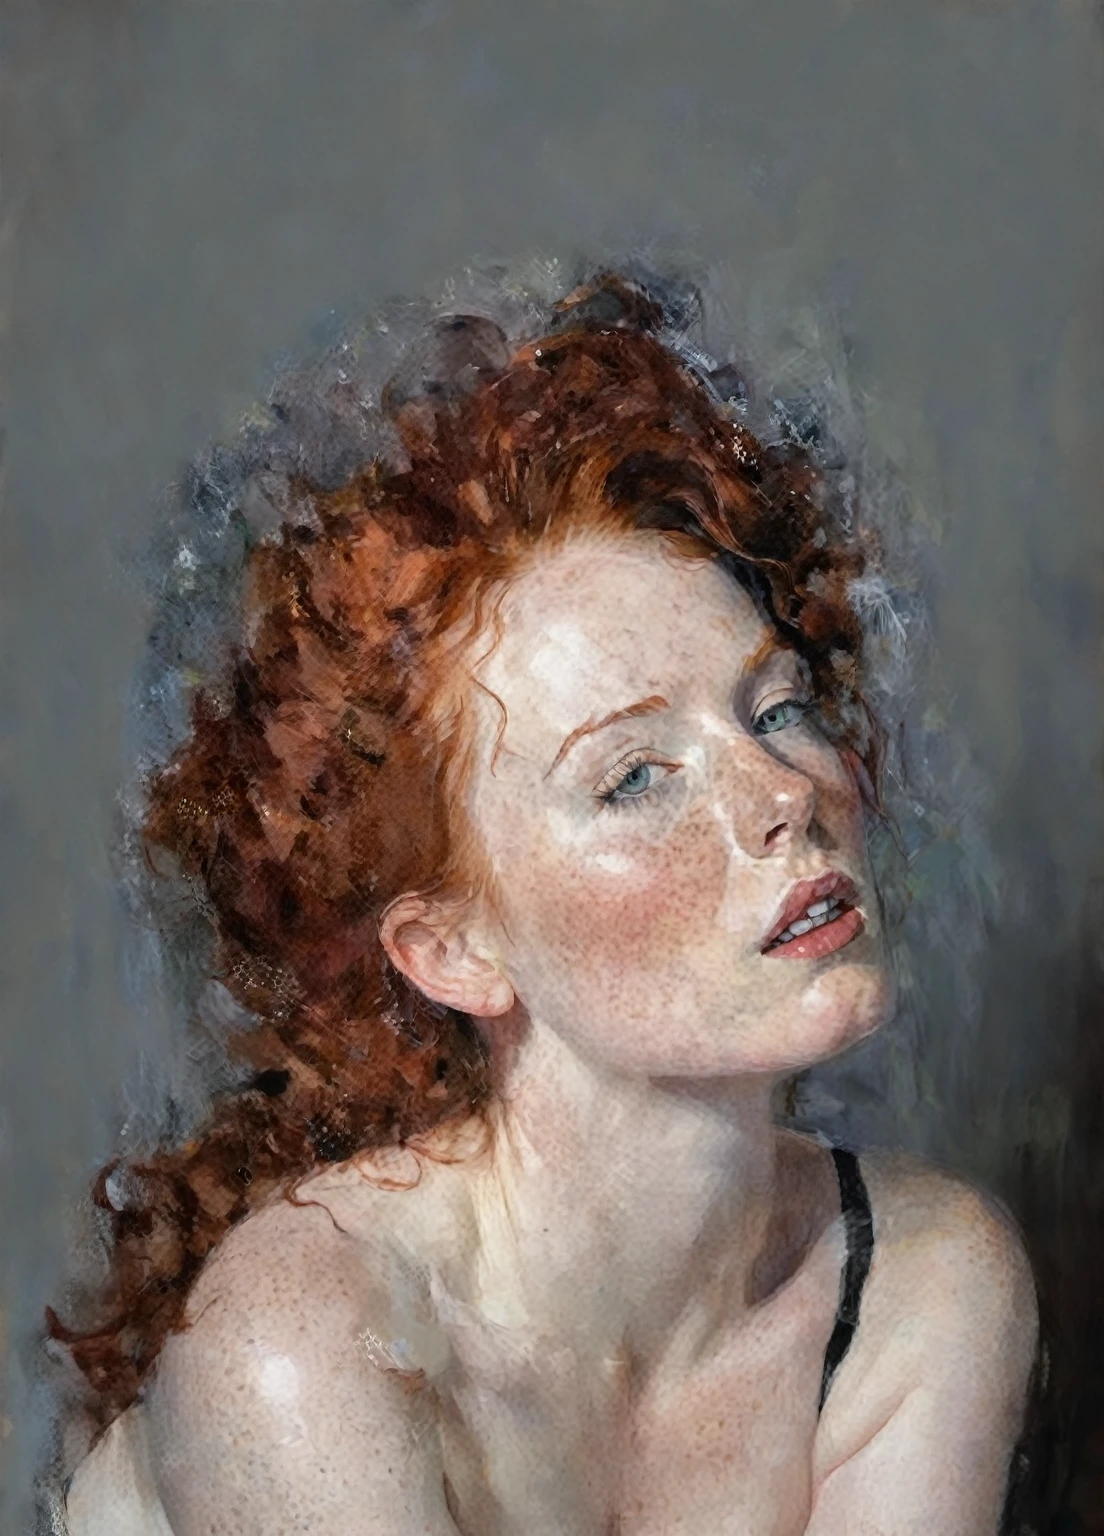 painting of a redheaded woman with red hair and a black bra, redhead with freckles, with pale skin, red hair and freckles, pale and freckled skin, redhead woman, pale and fair skin!!, redhead and fur, red head, with curly red hair, redhead, a young redhead, with freckles, white skin muy muy pálida, chica pelirroja